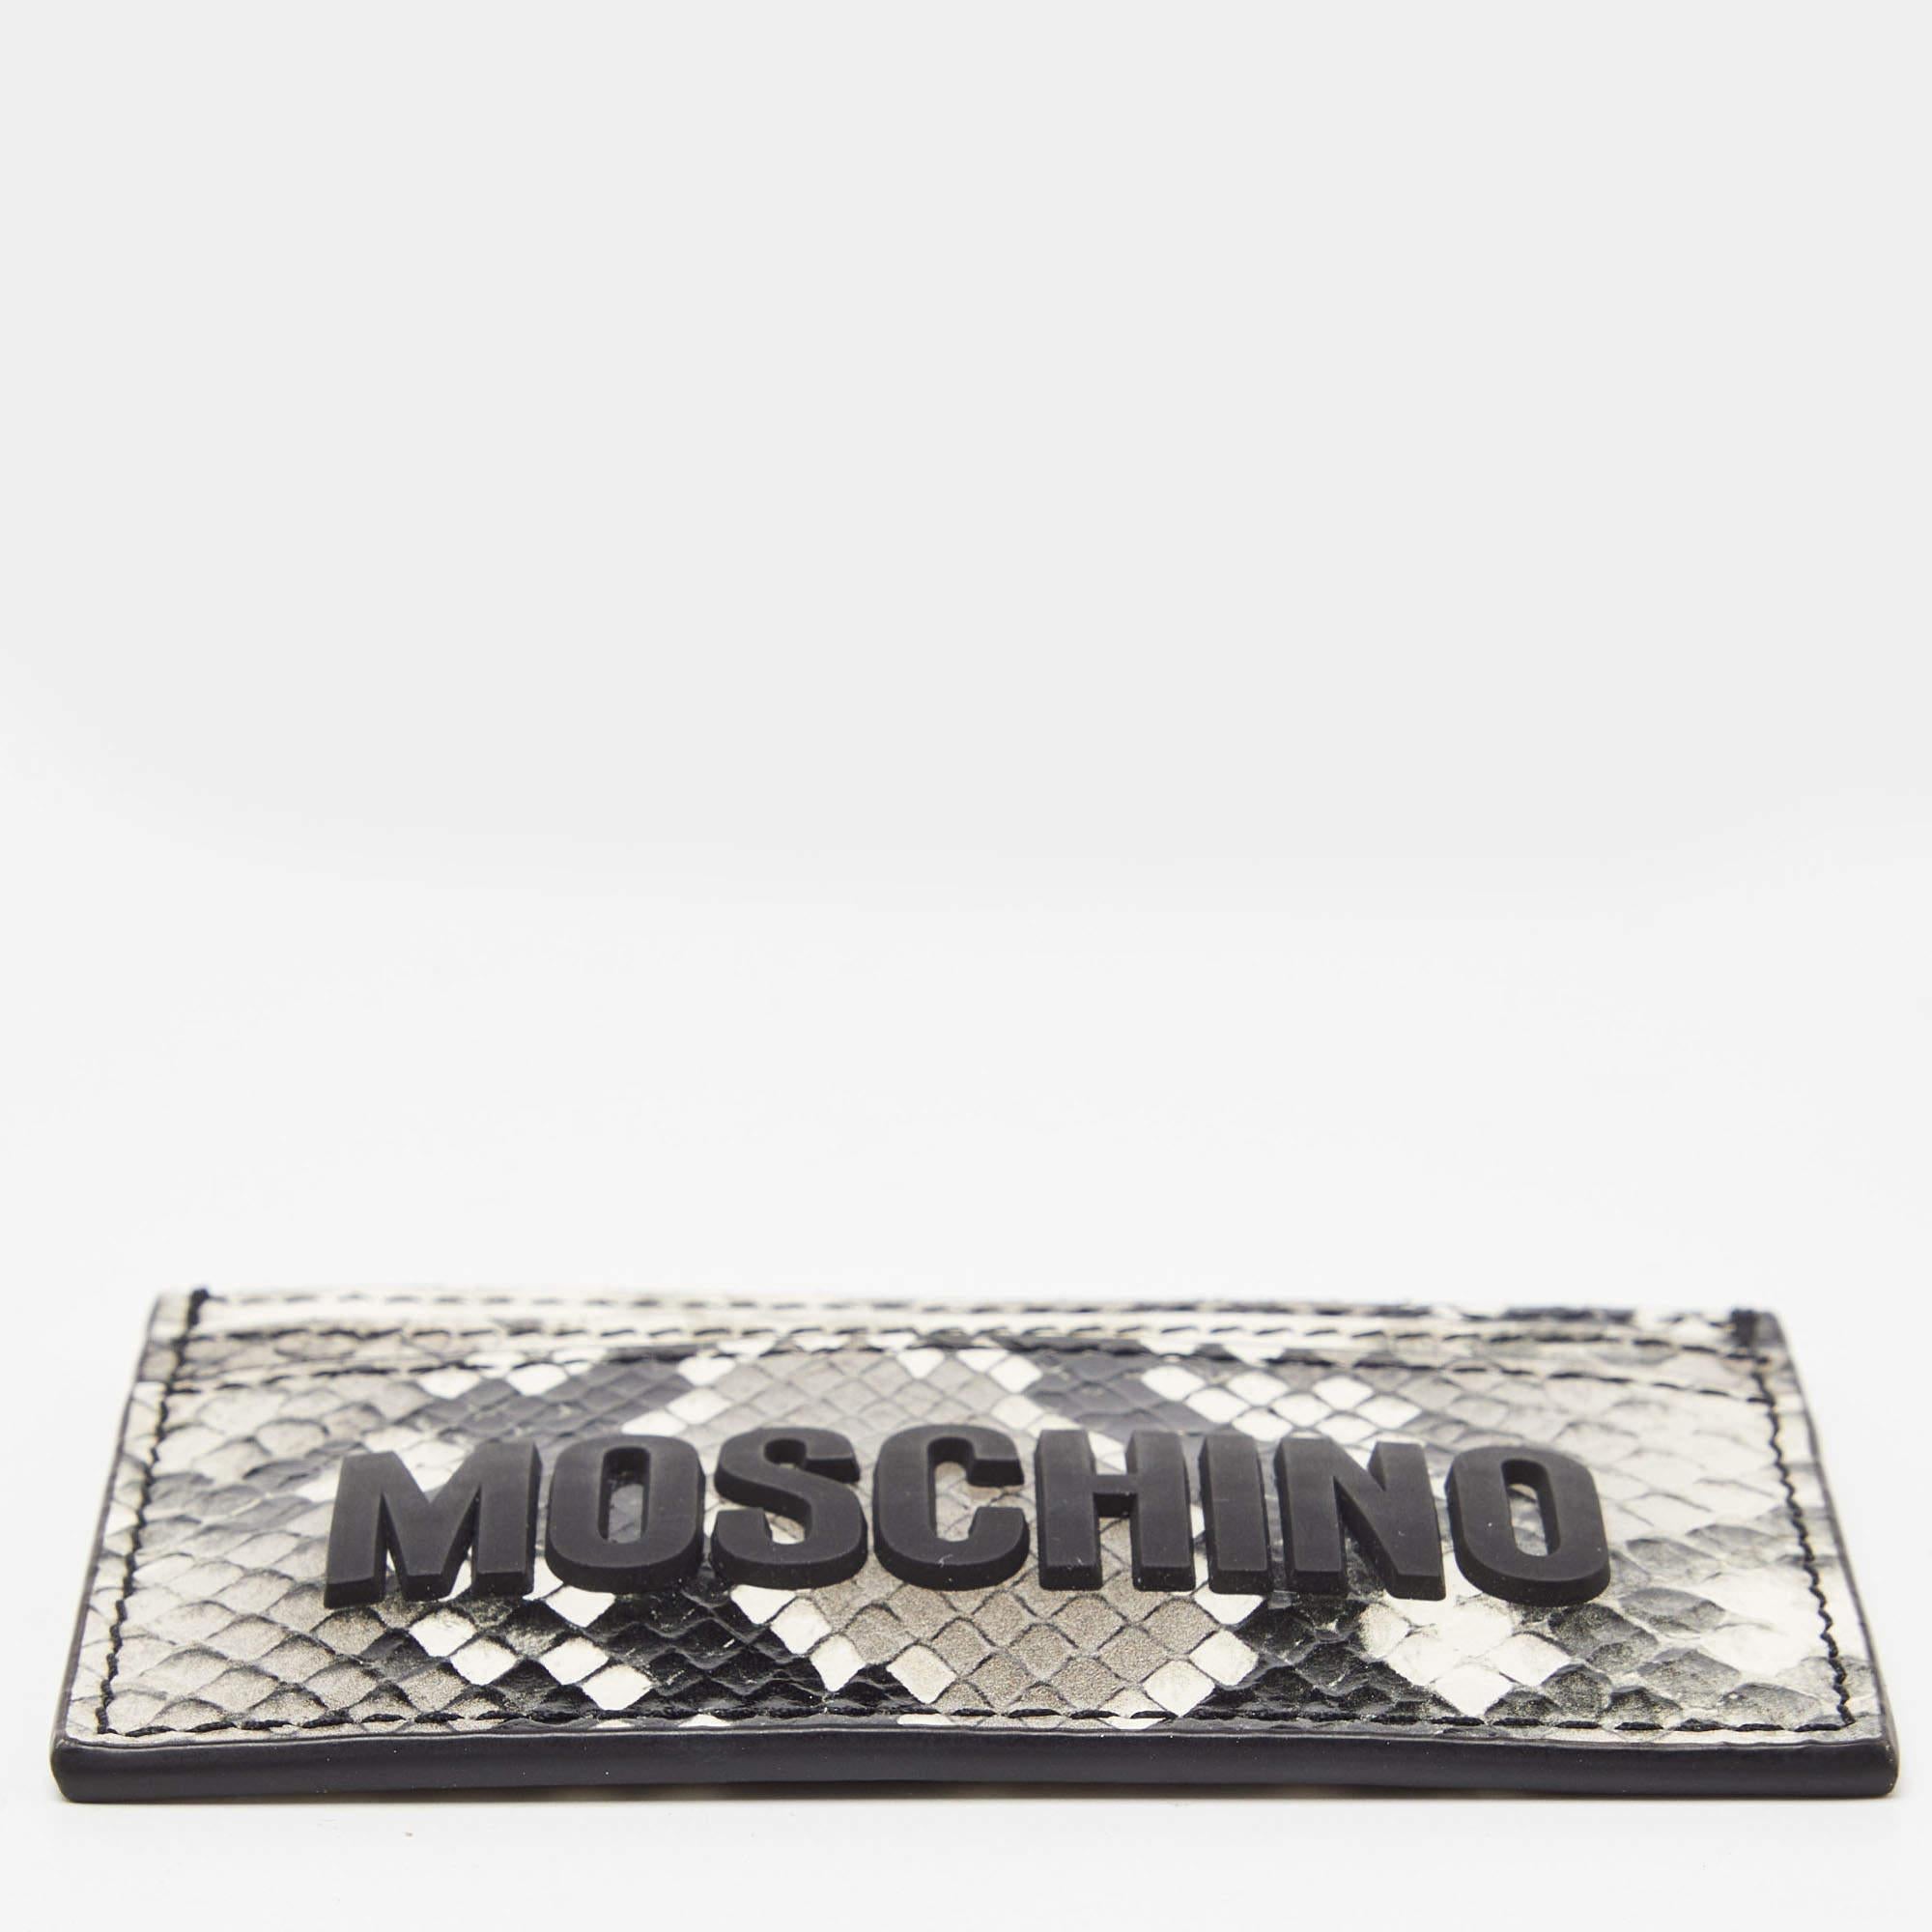 Moschino Grey/White Snakeskin Embossed Leather Card Holder In Excellent Condition For Sale In Dubai, Al Qouz 2